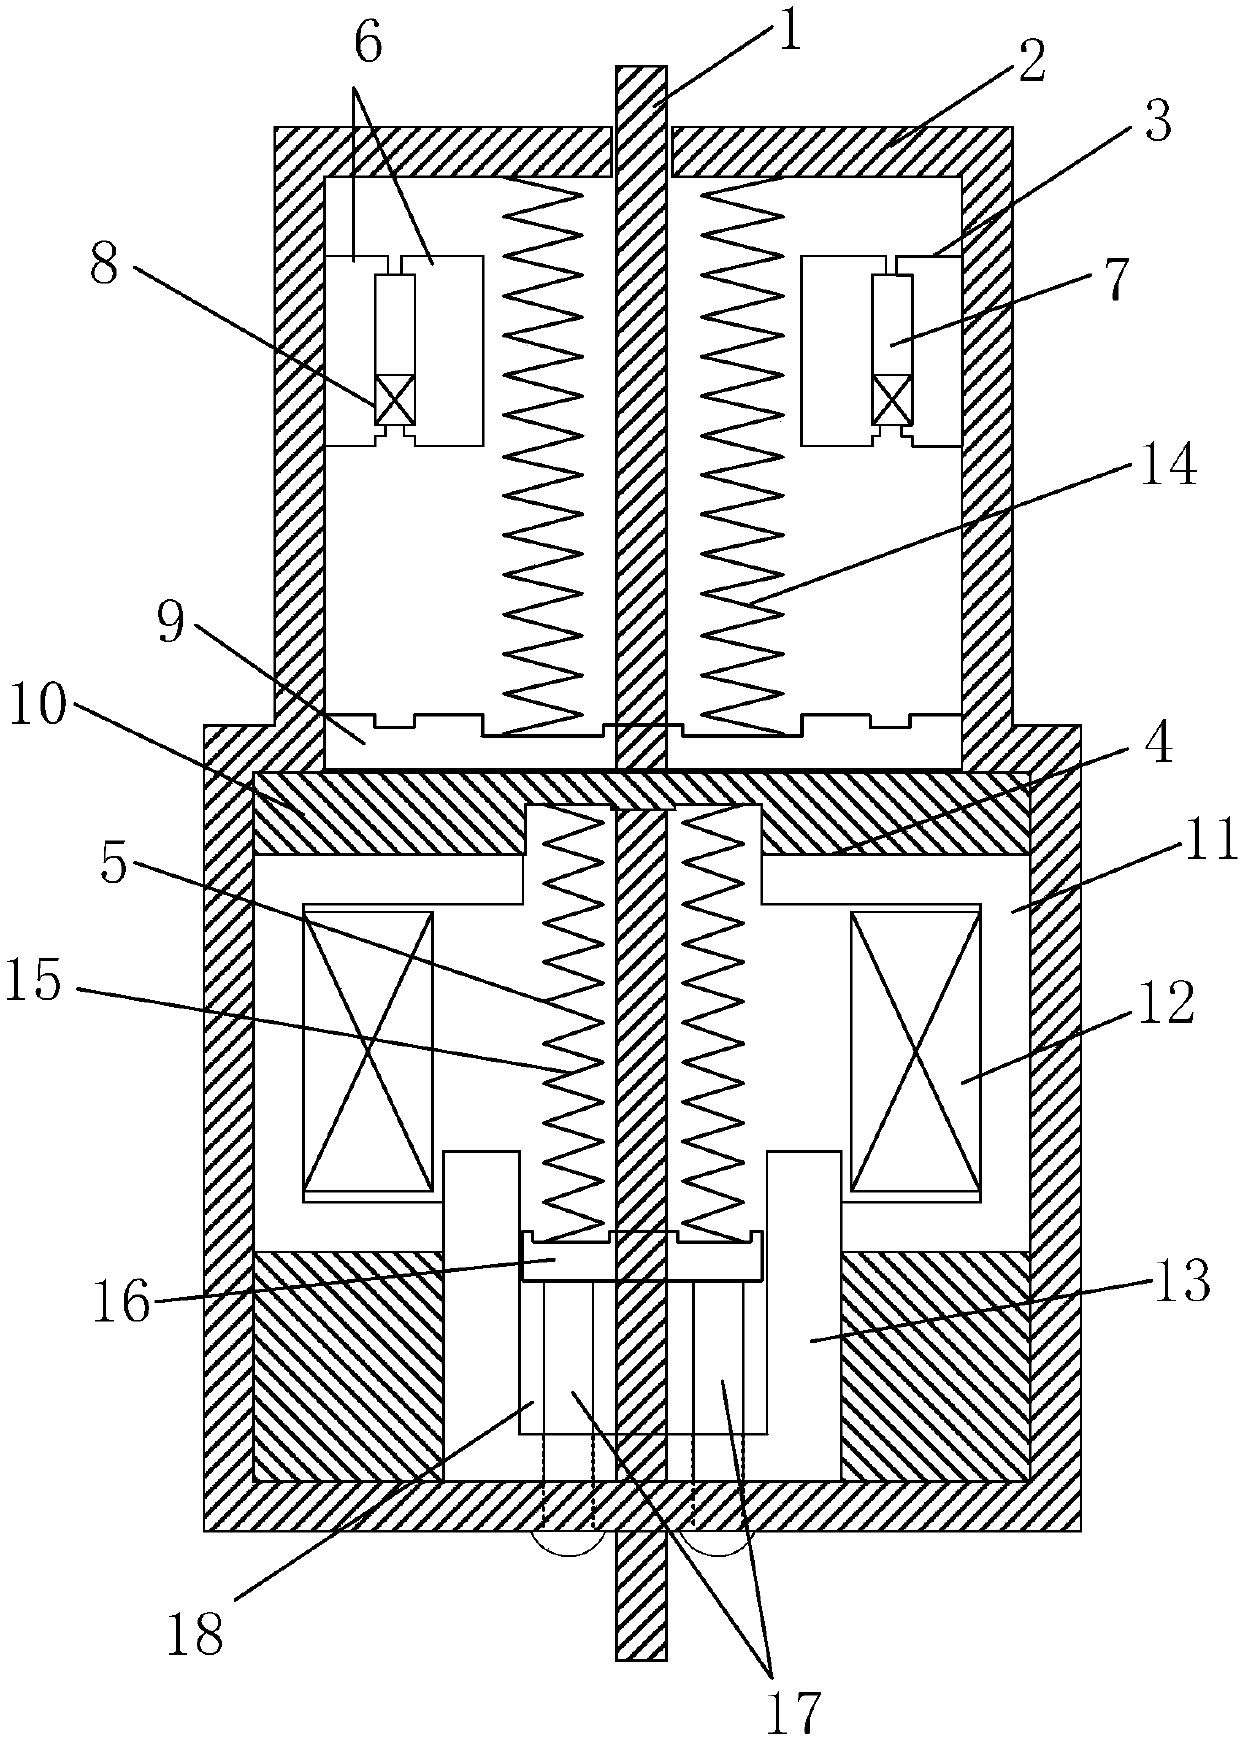 A monostable permanent magnet mechanism for high voltage circuit breaker with combined opening spring